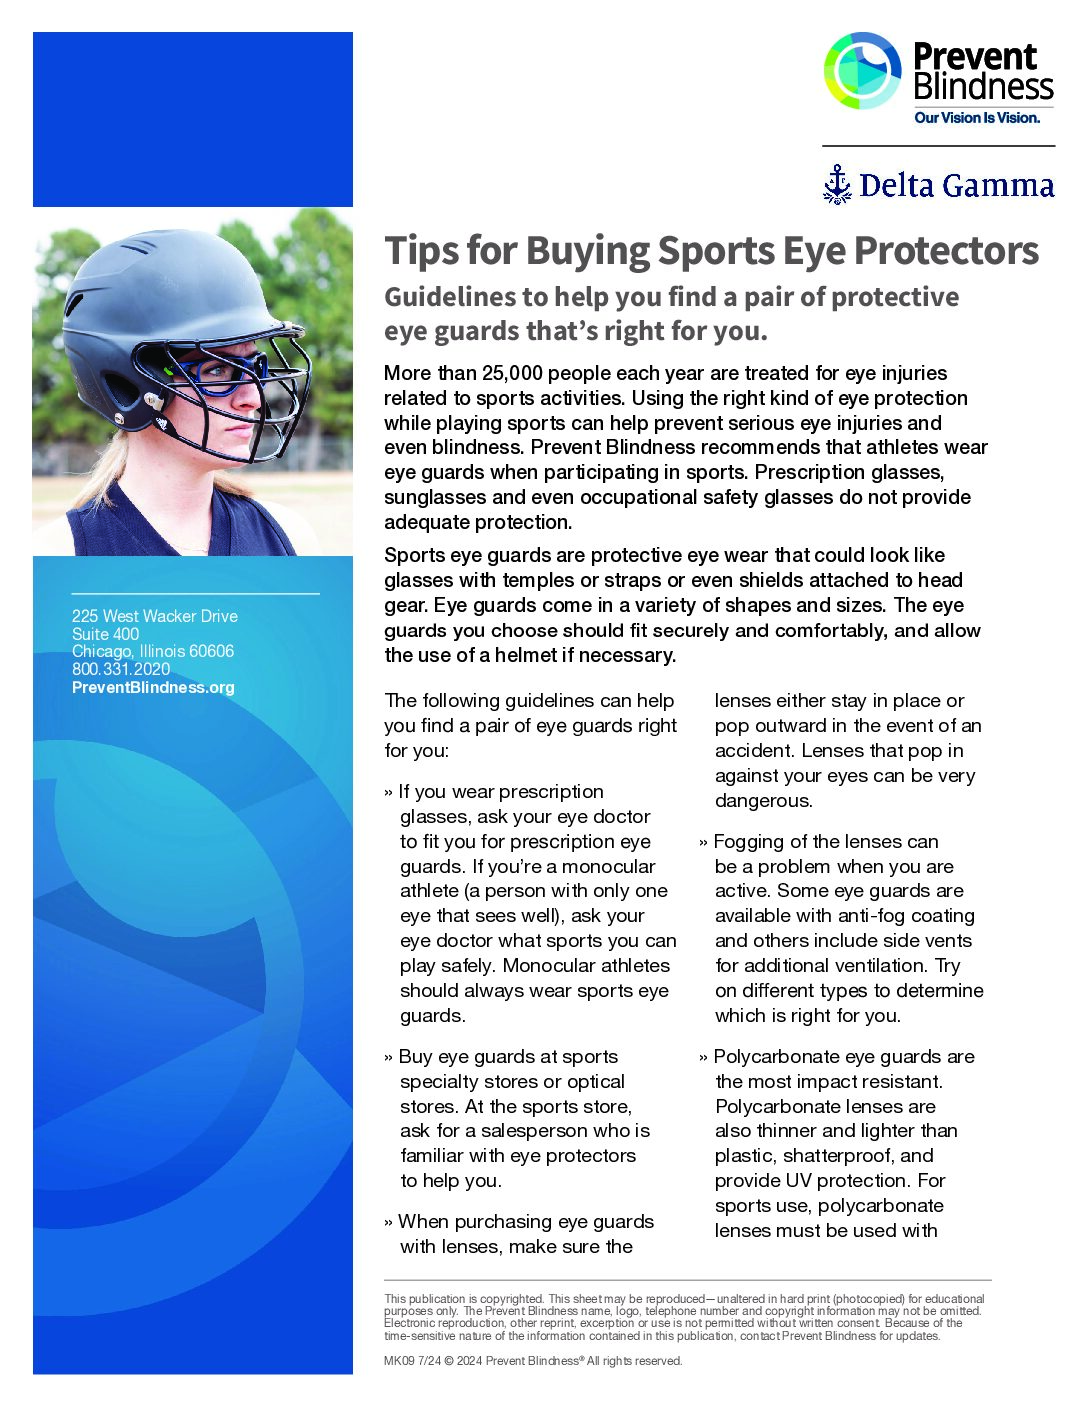 Tips for Buying Sports Eye Protection